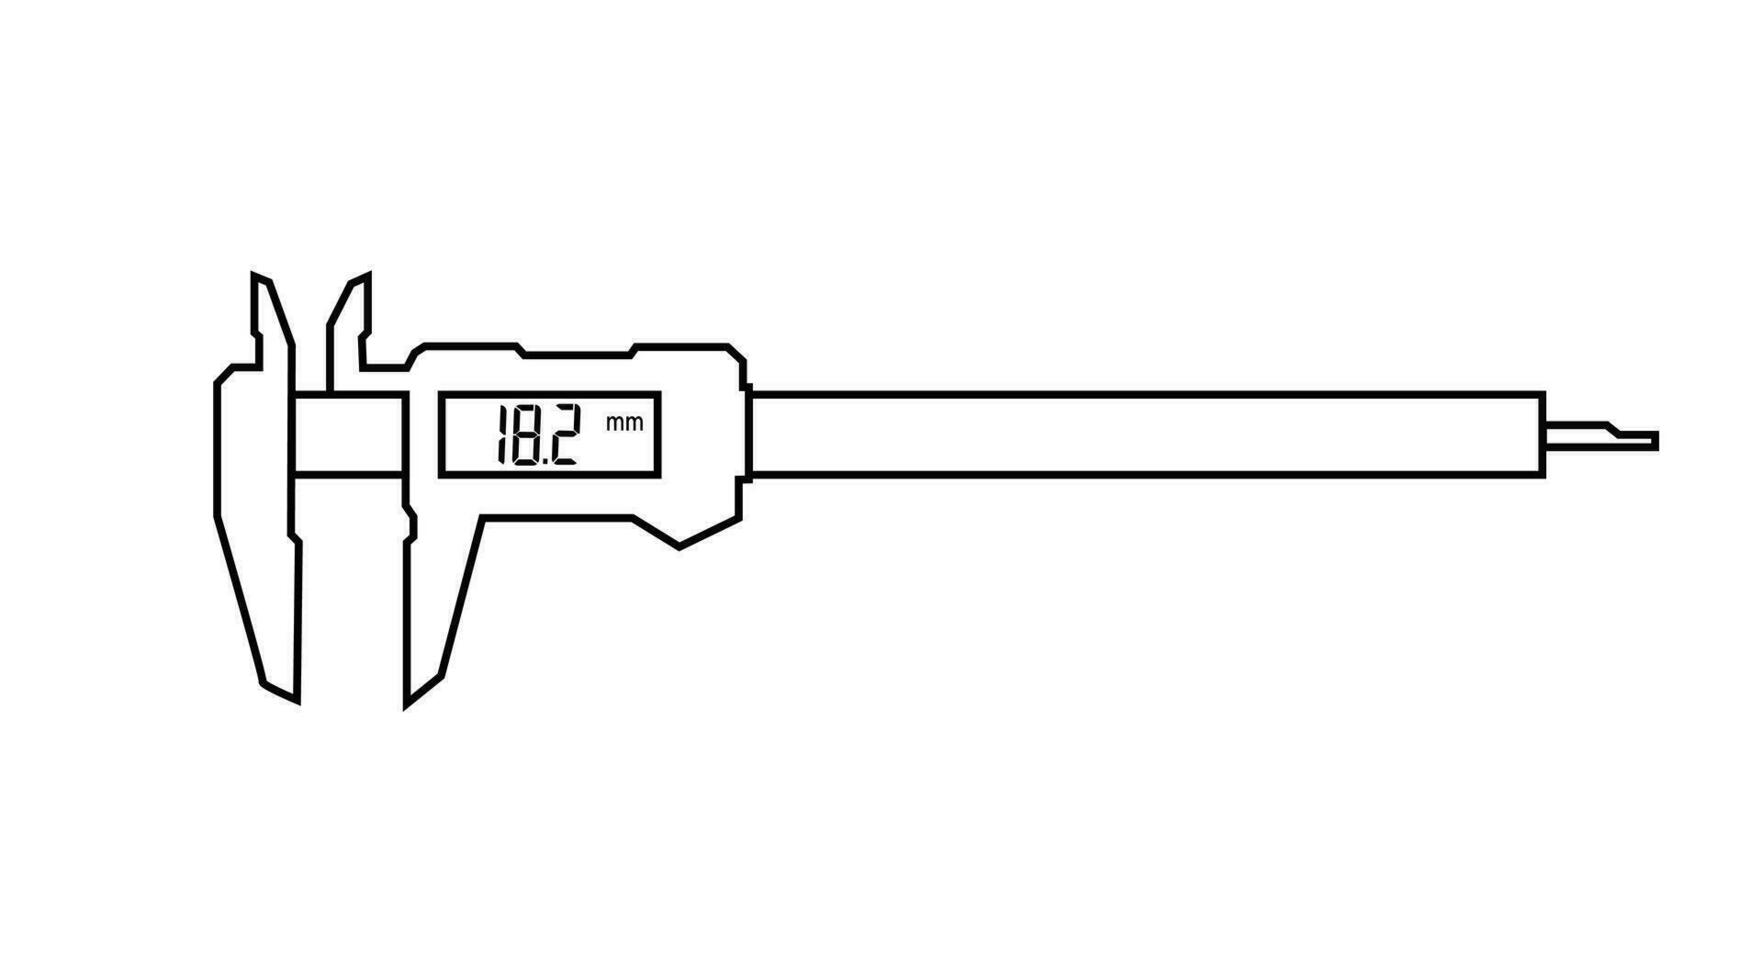 Digital calipers with Integrated Wireless. The caliper is normally used for measuring the thickness of materials and small amounts of movement. Vector illustration EPS-10